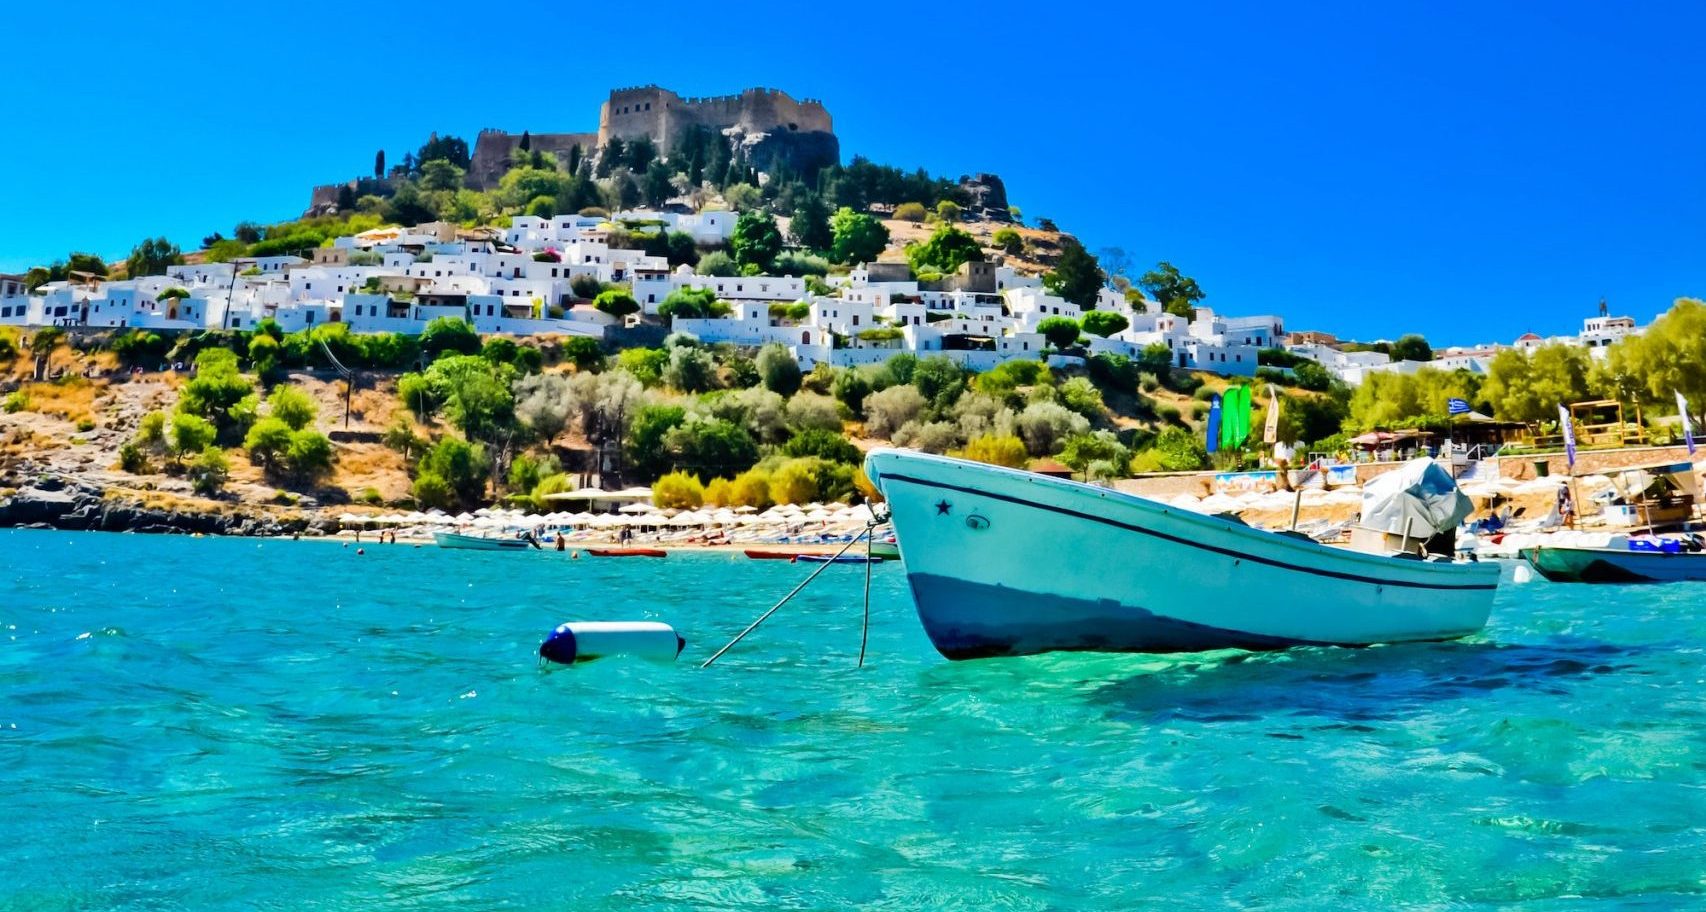 WIN AN UNFORGETTABLE ADVENTURE IN GREECE! (This competition is now closed).